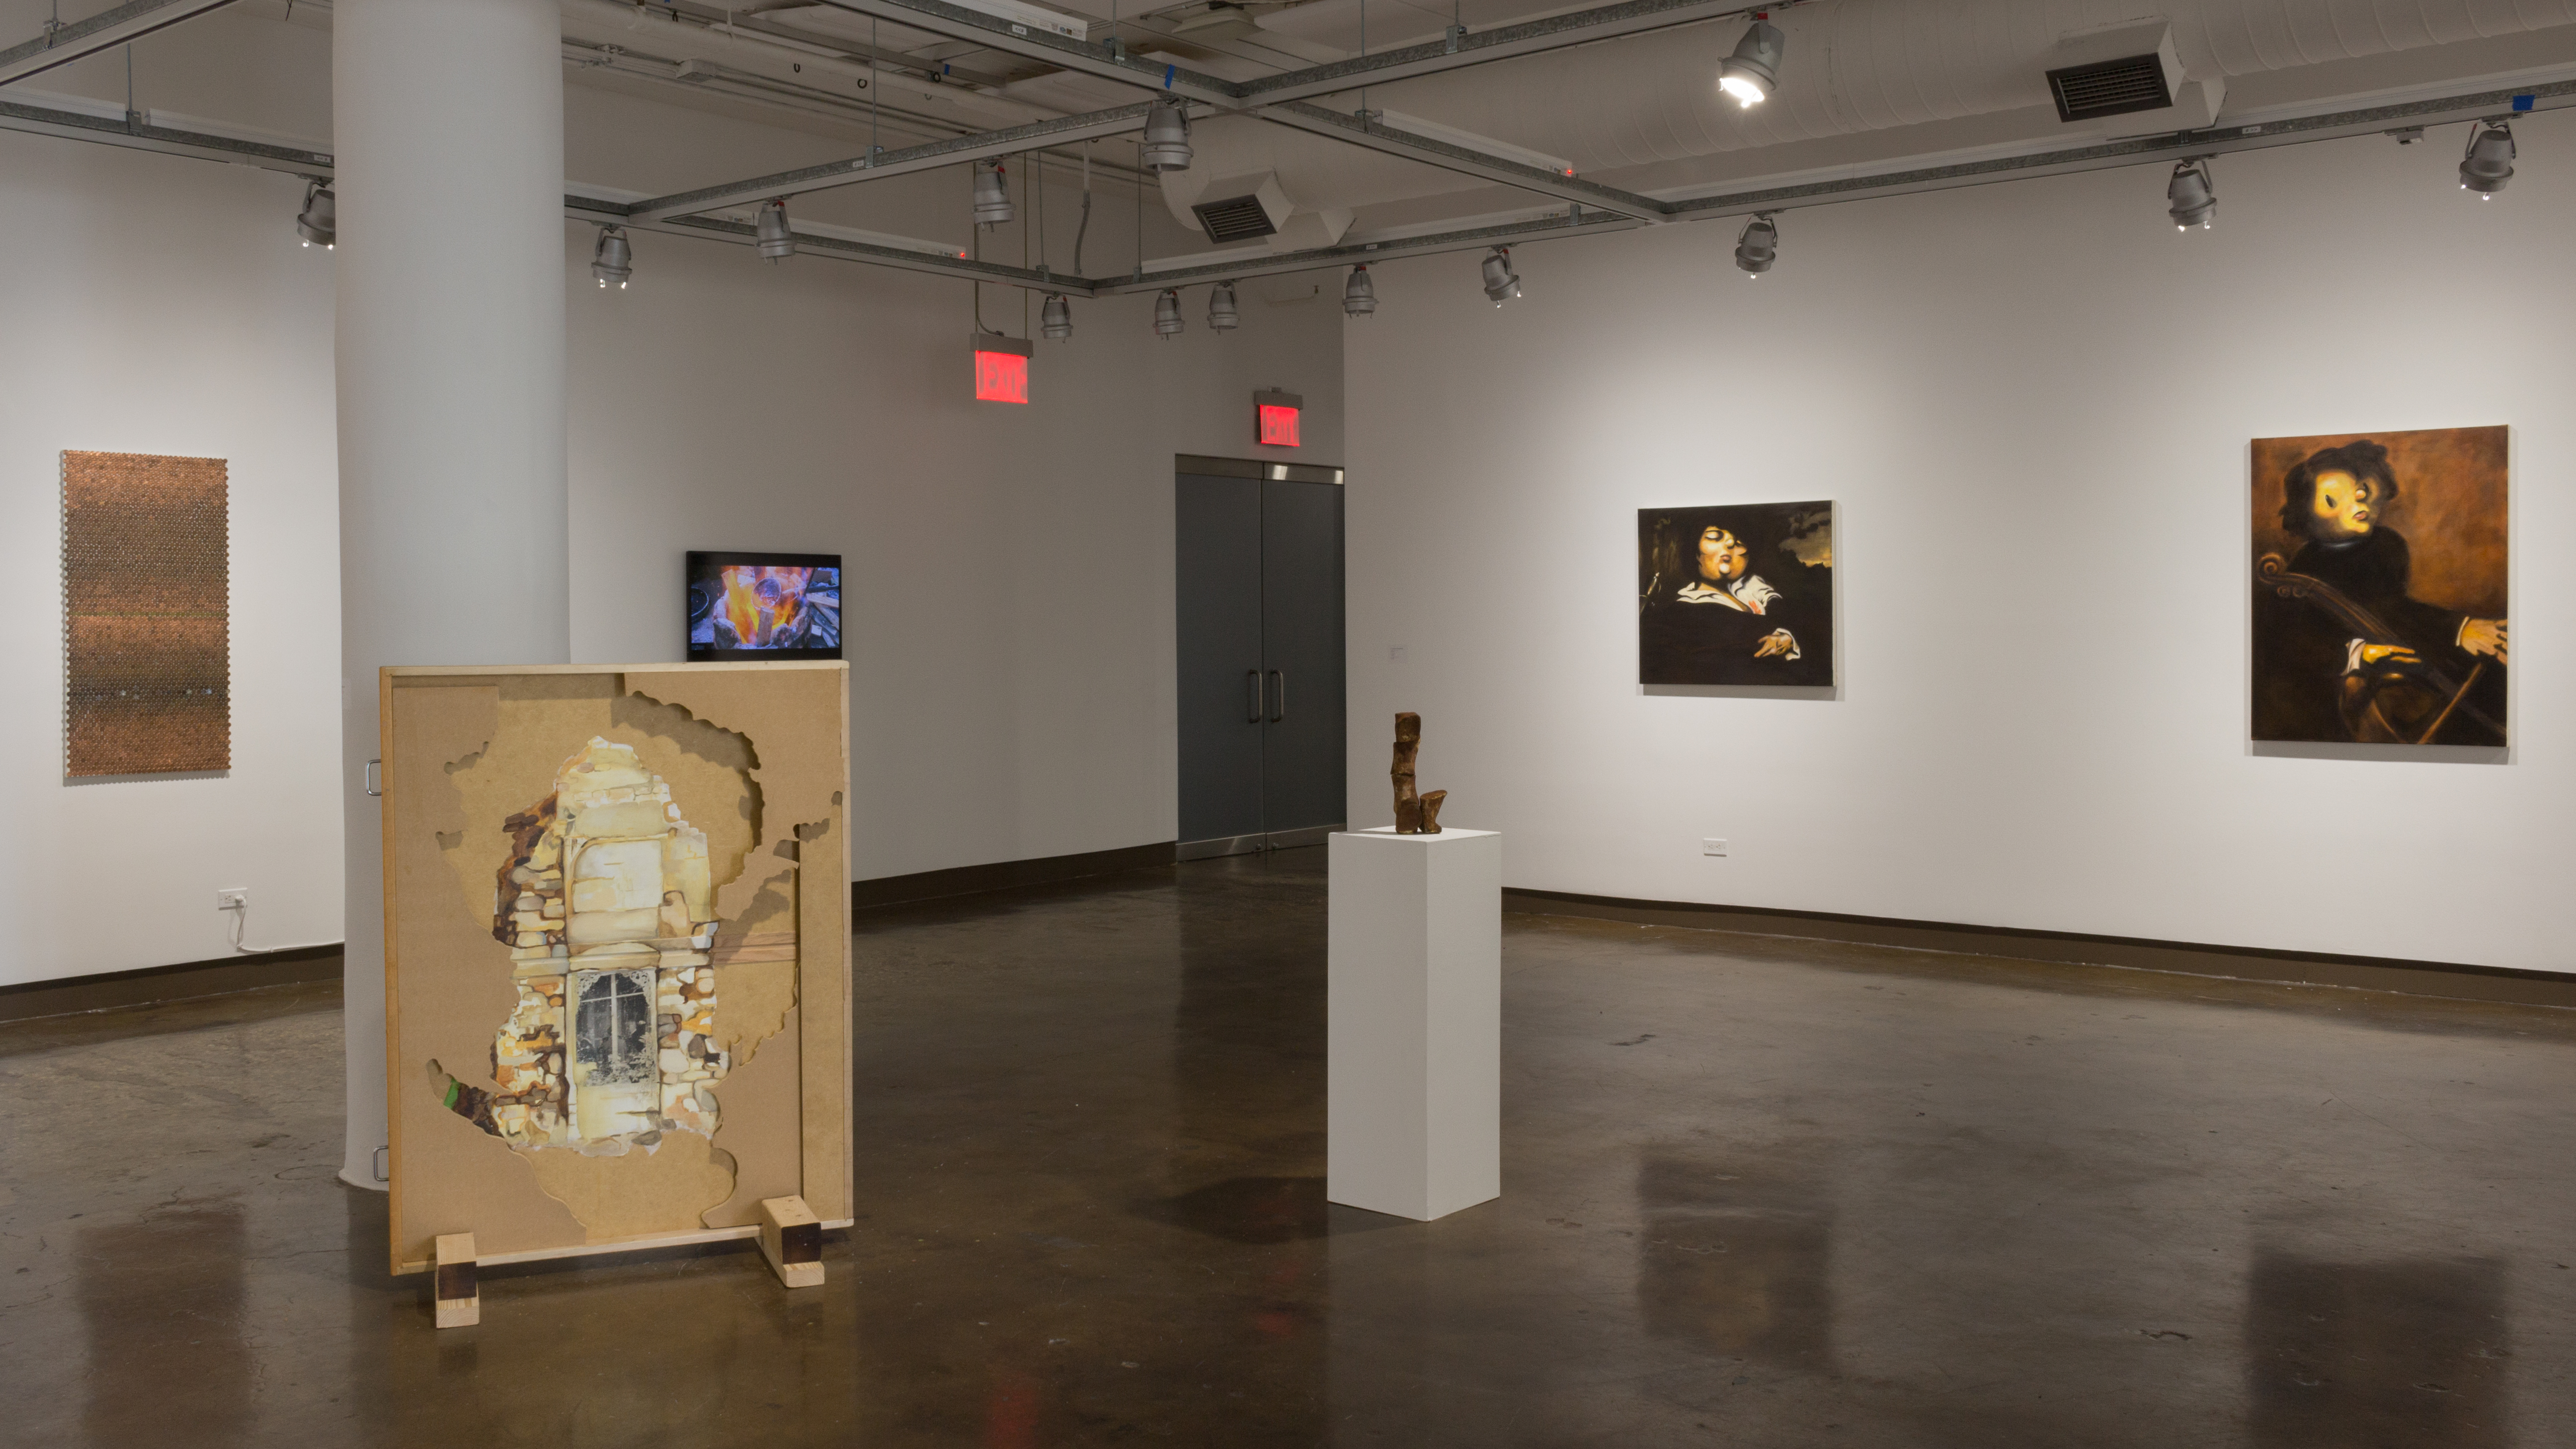 Installation view at Constellations at the SVA Gallery, 2019.